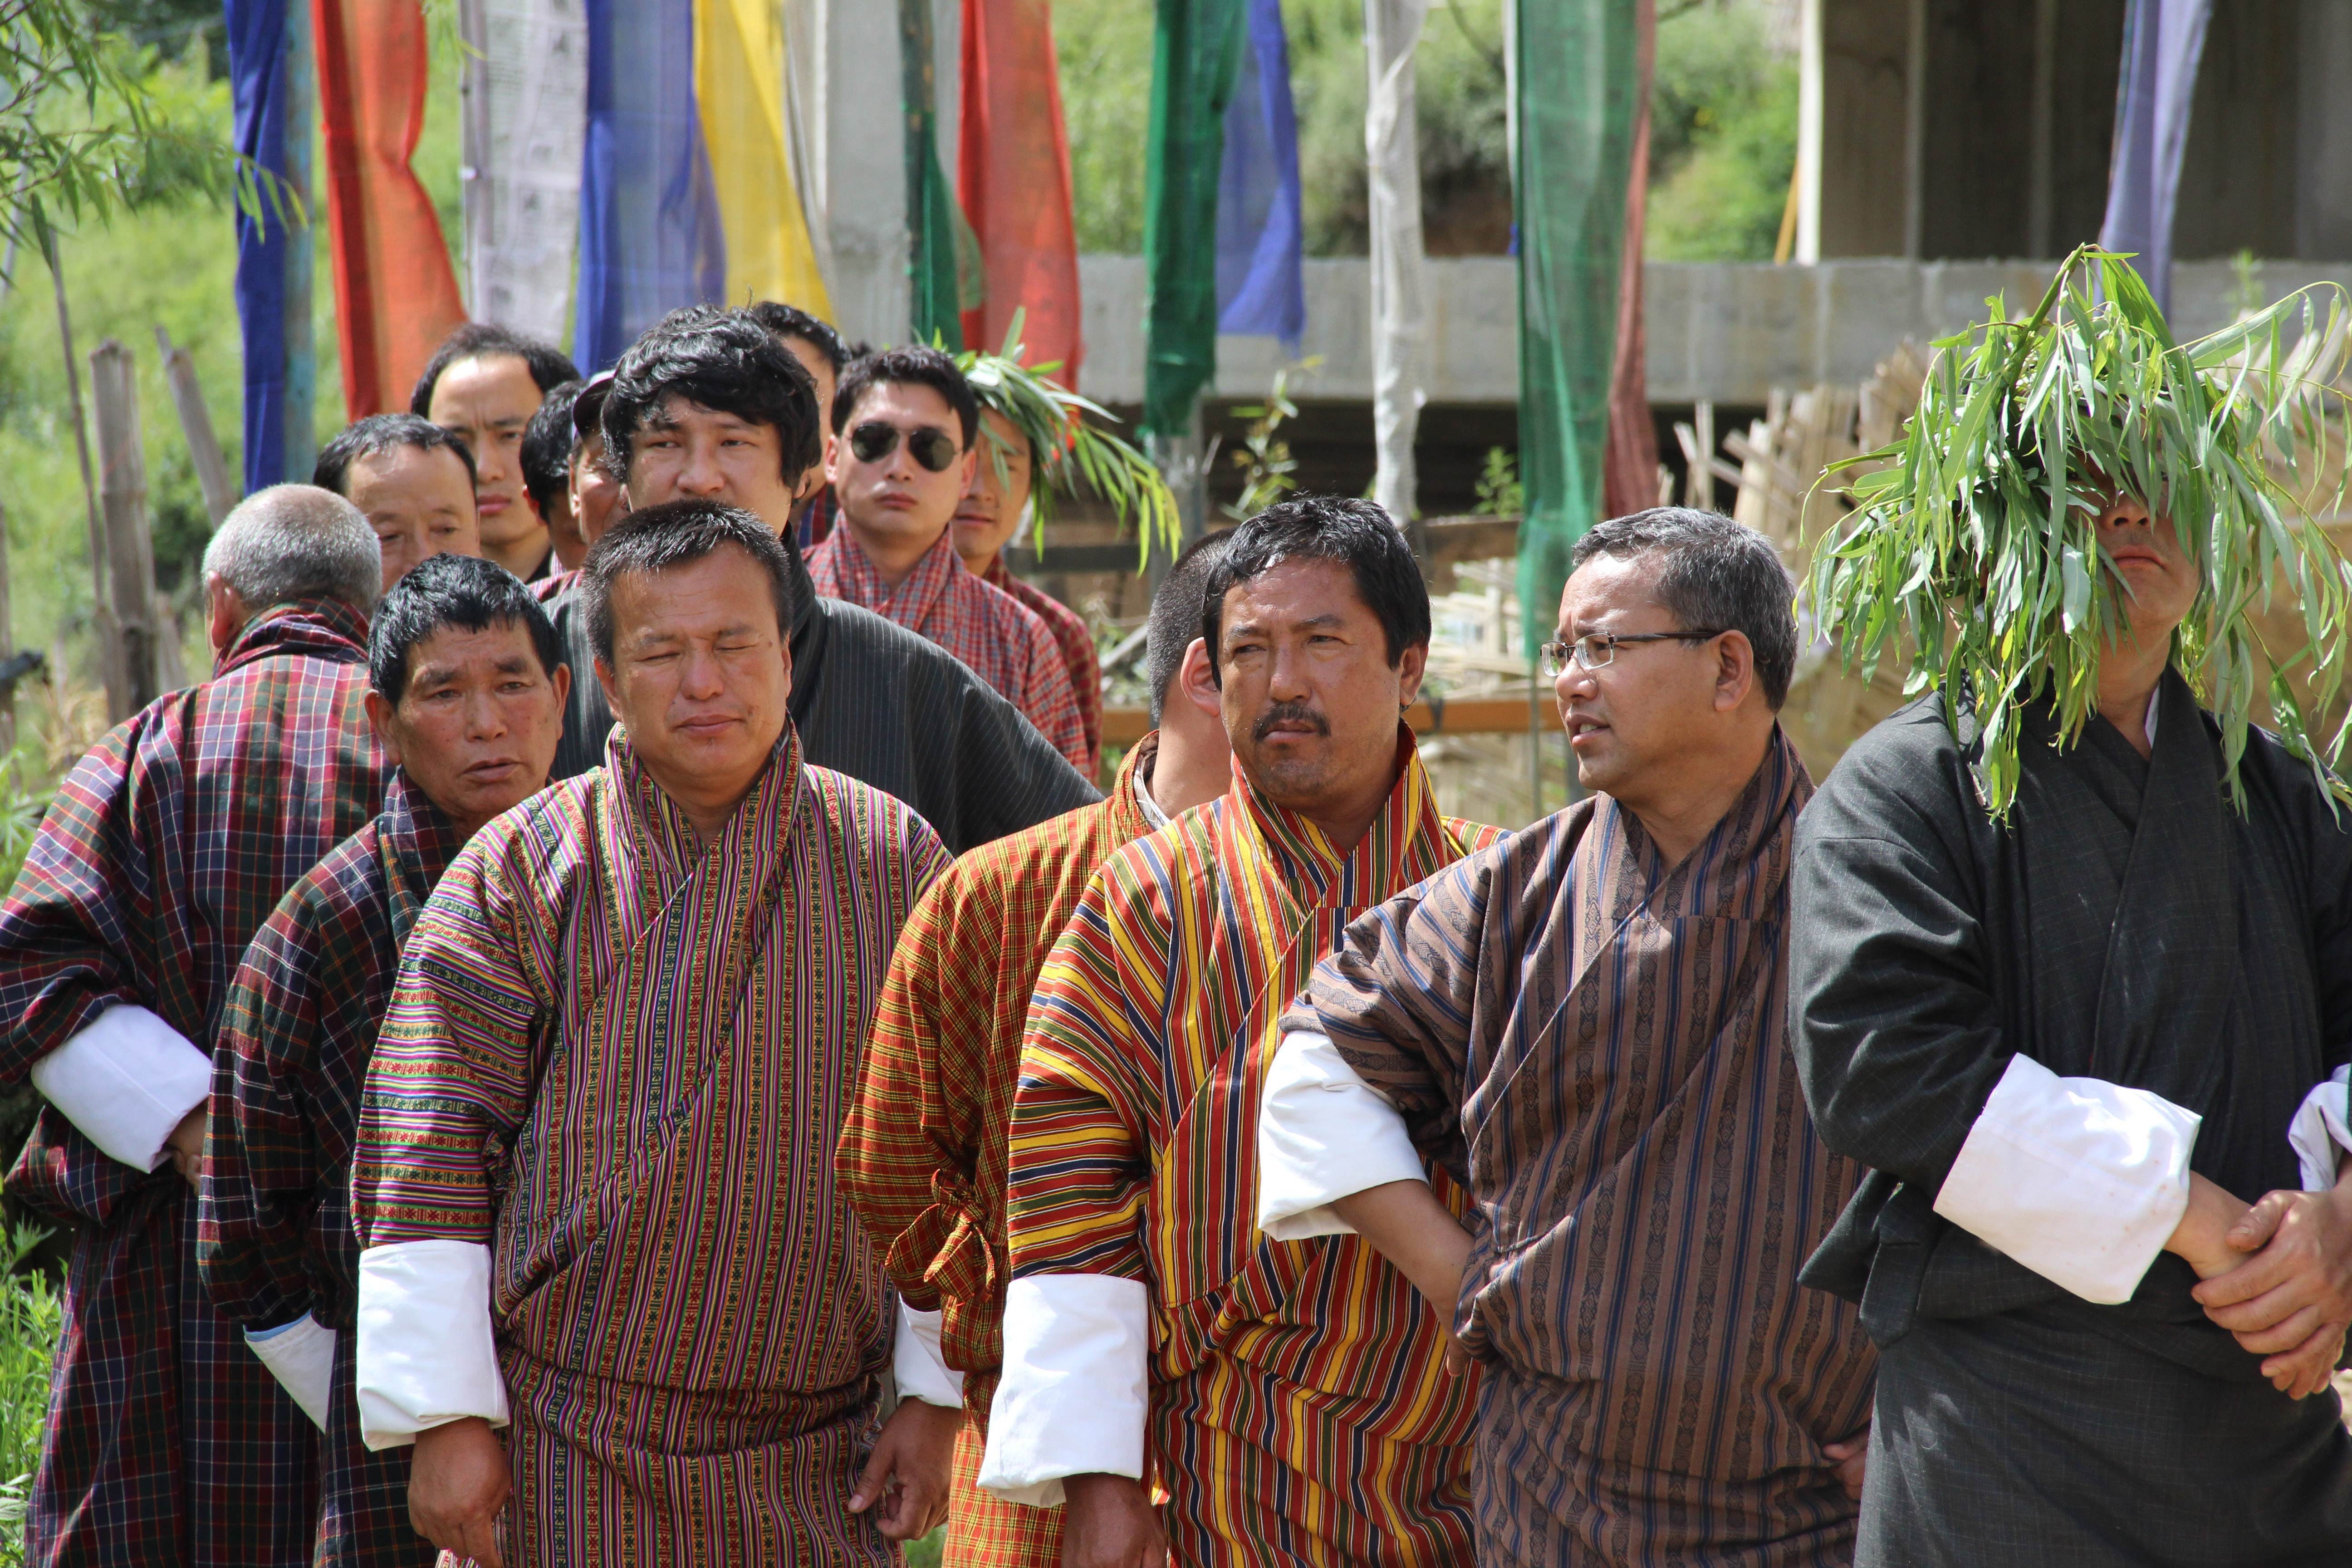 Men line up in Thimphu in Bhutan, which measures Gross National Happiness along with GDP. Photo: AFP